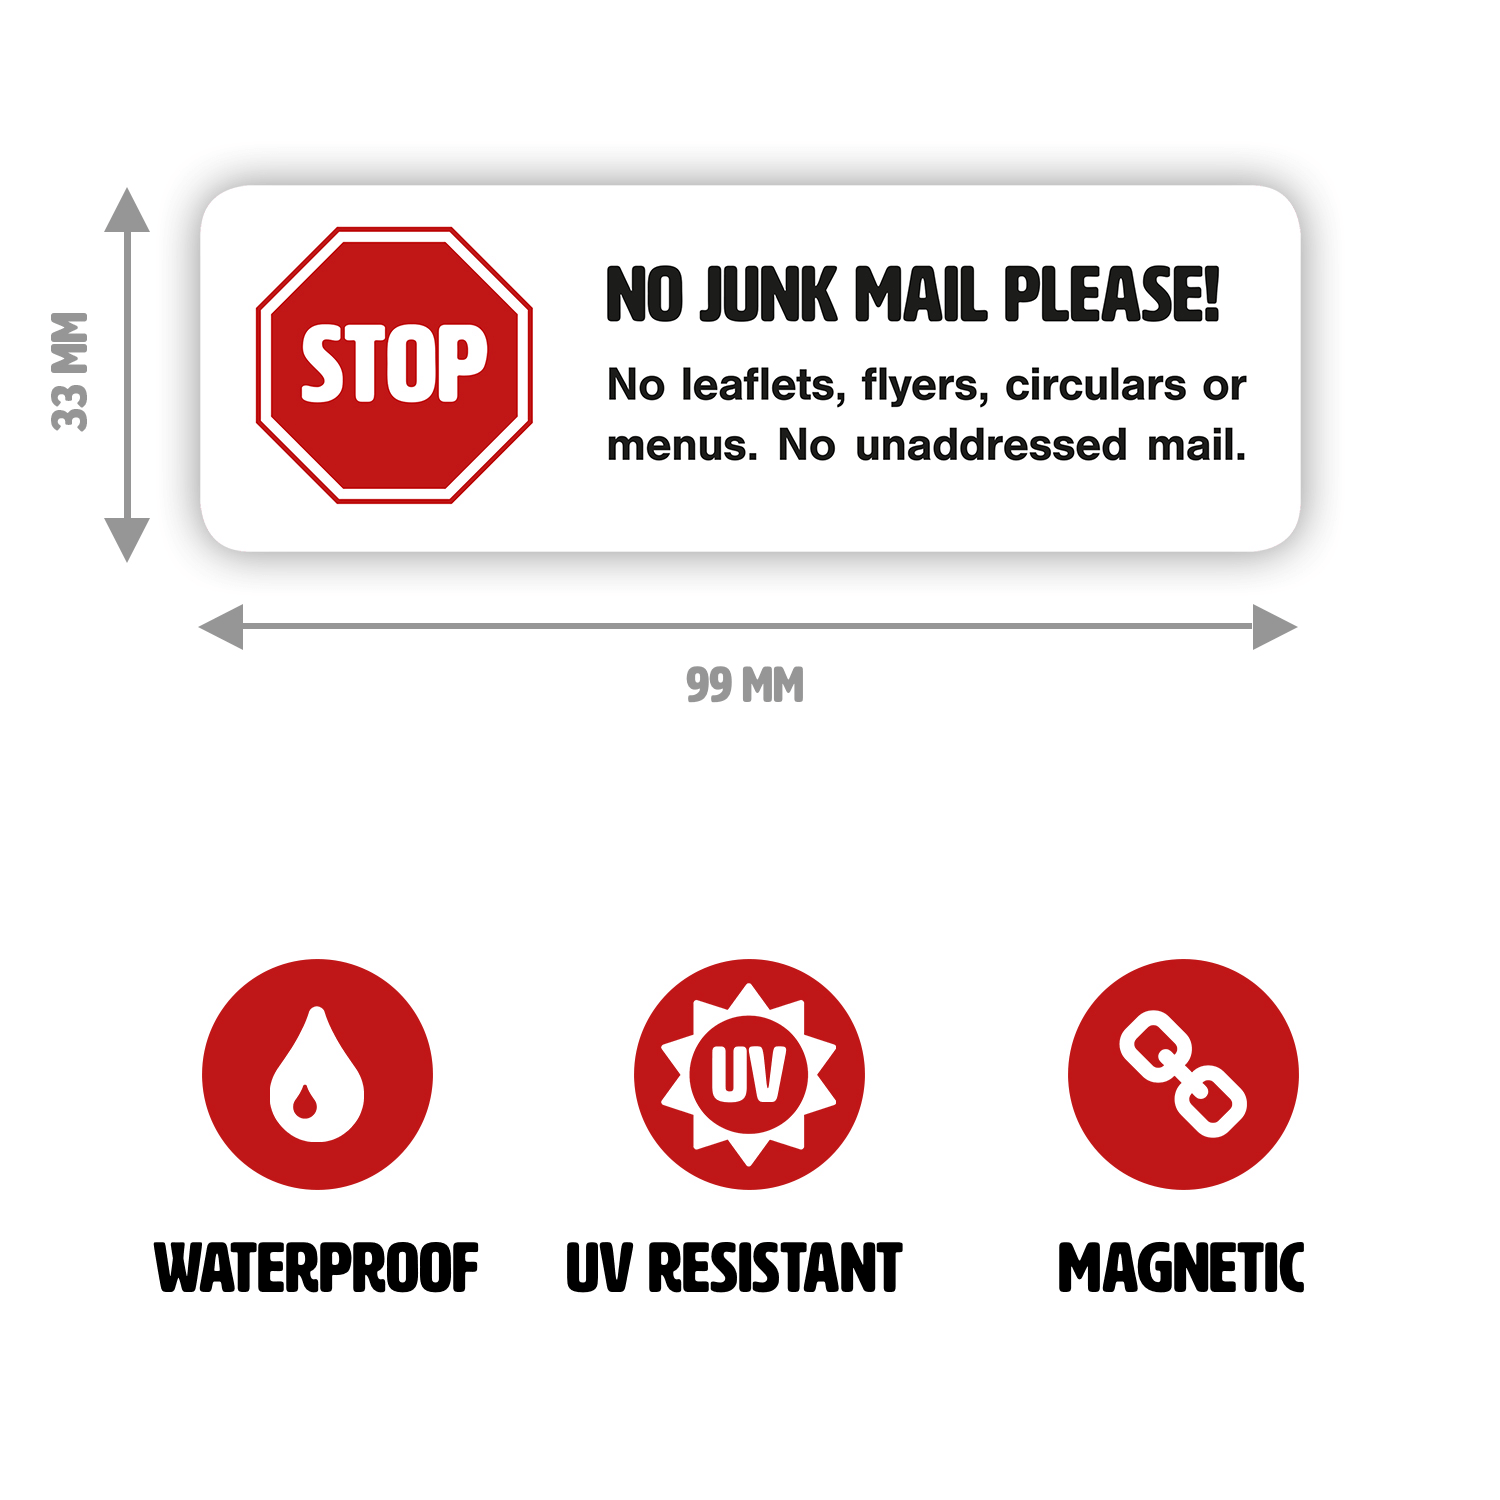 Magnetic no junk mail sign